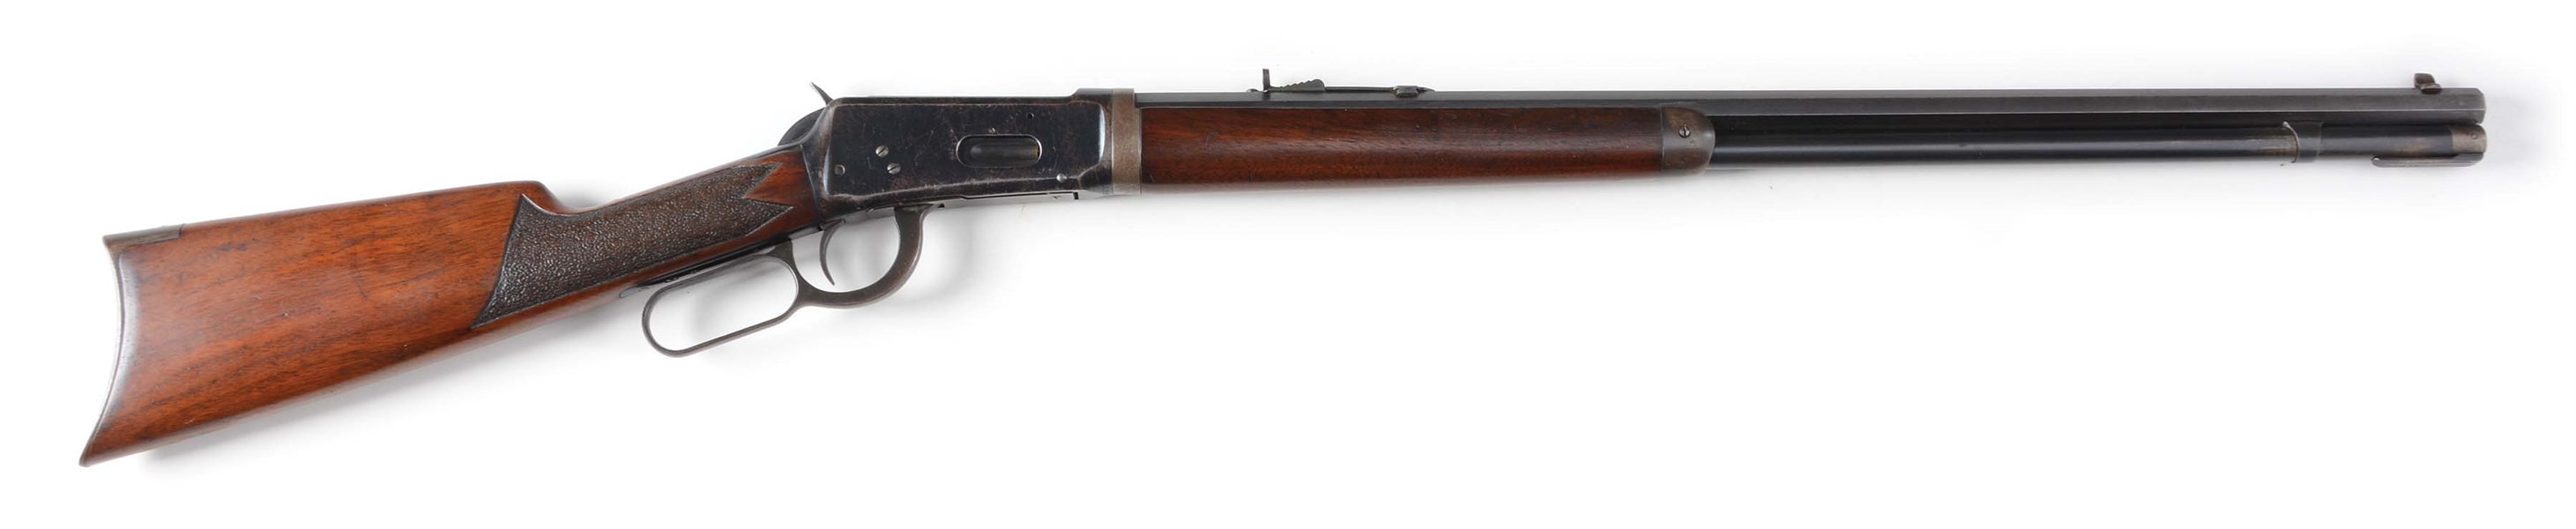 (C) WINCHESTER MODEL 1894 .30 CALIBER LEVER ACTION TAKEDOWN RIFLE (1920).